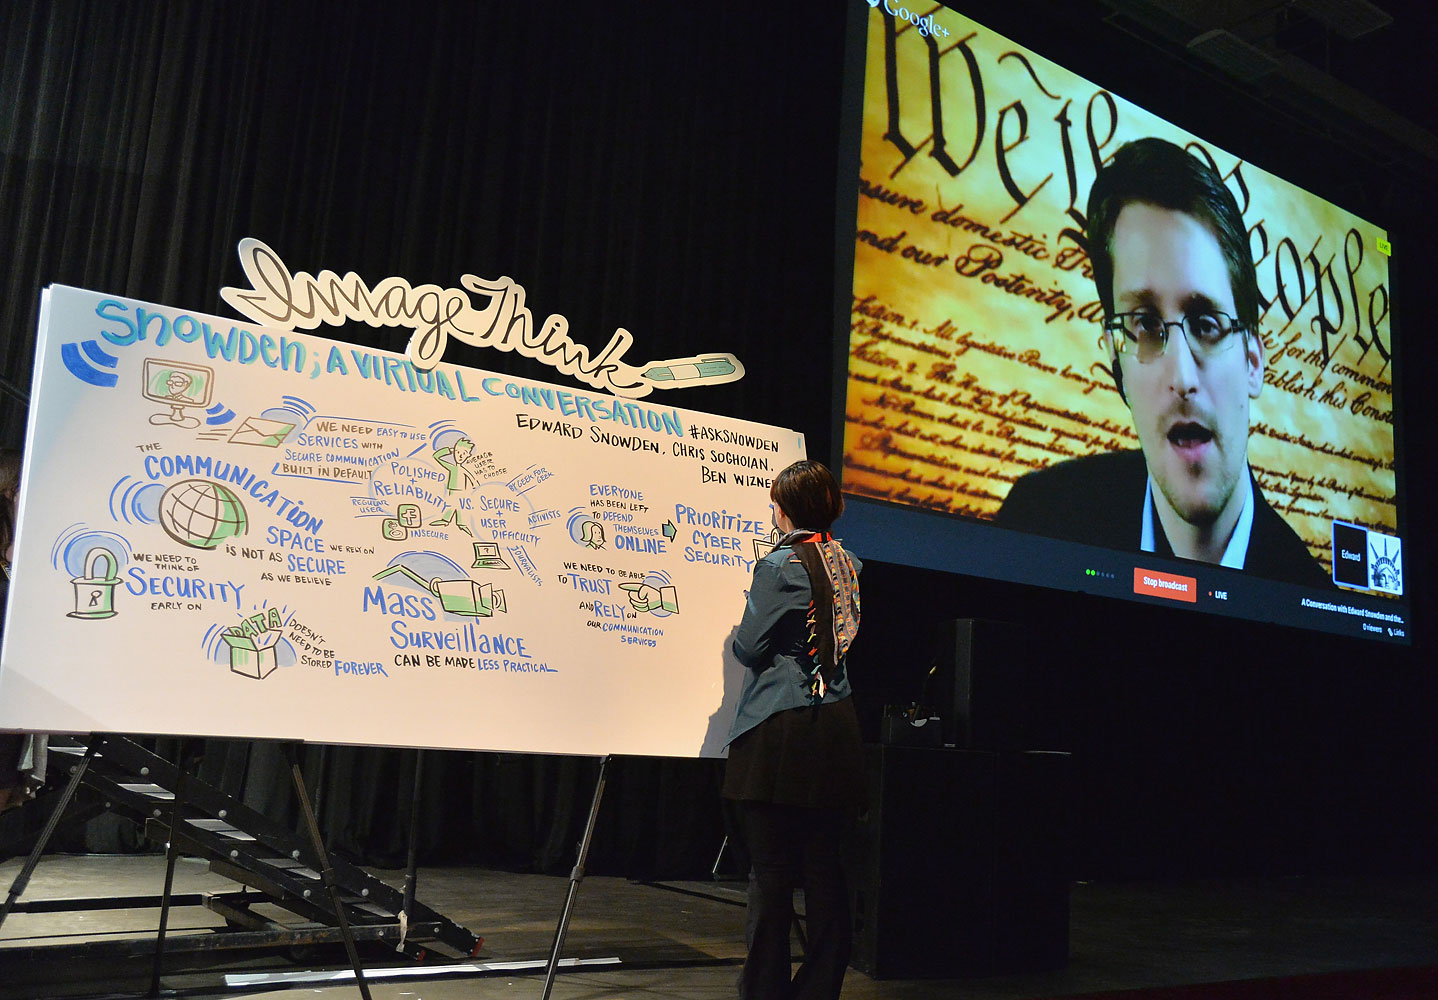 NSA whistleblower Edward Snowden speaks via videoconference at the "Virtual Conversation With Edward Snowden" during the 2014 SXSW Music, Film + Interactive Festival at the Austin Convention Center on March 10, 2014 in Austin.